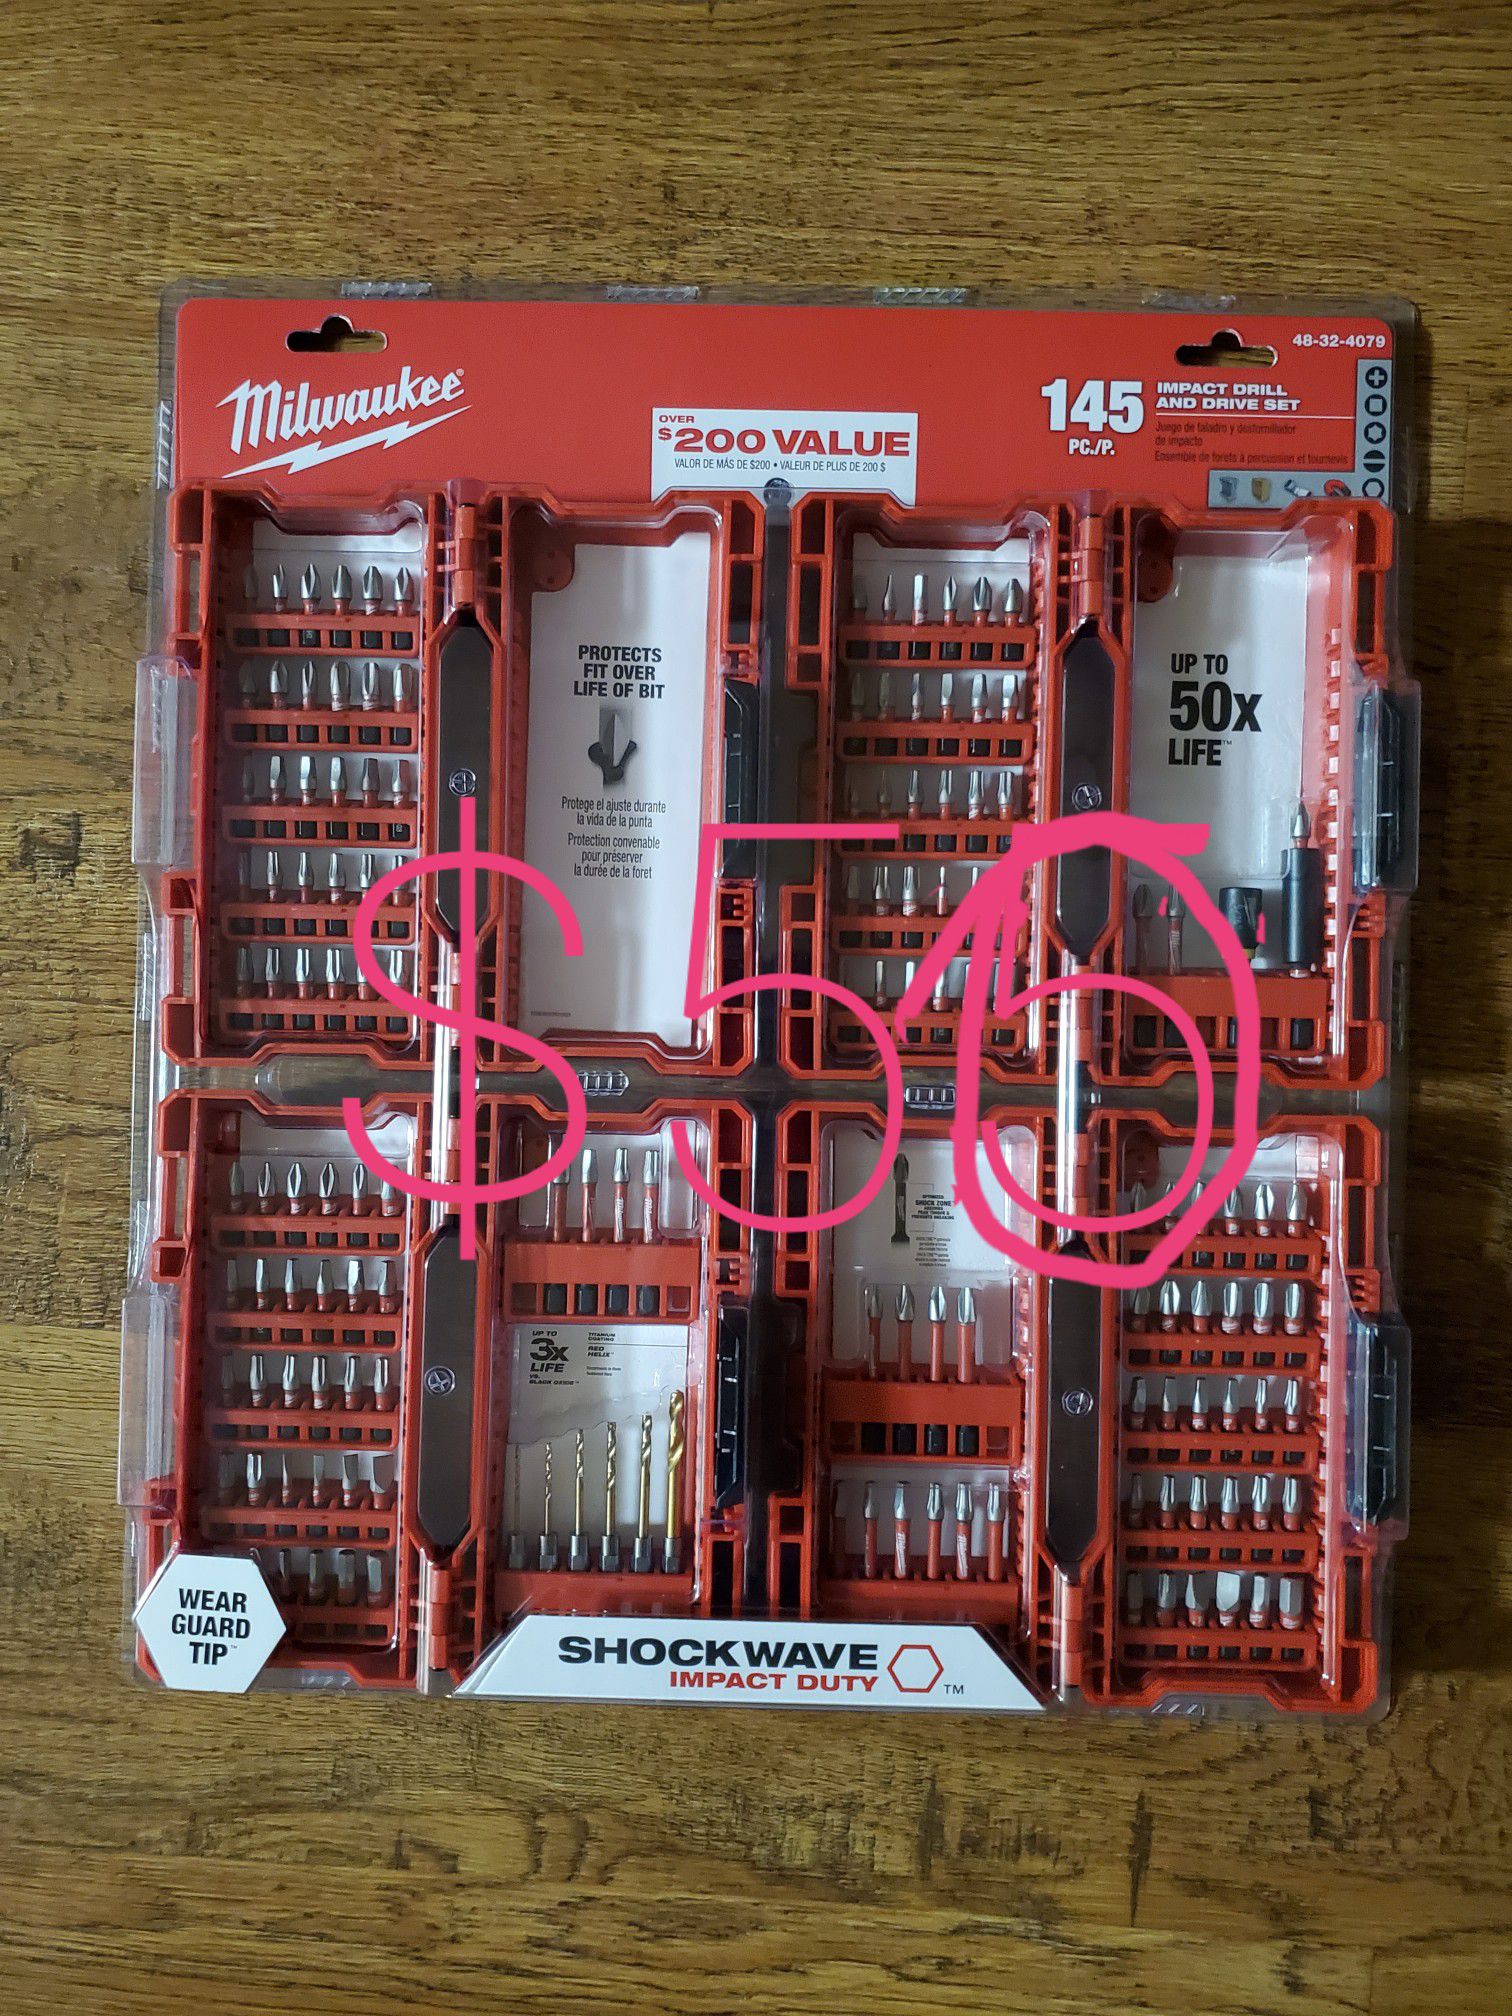 Brand new milwaukee 145 pc inpact drill and drive set Check my page